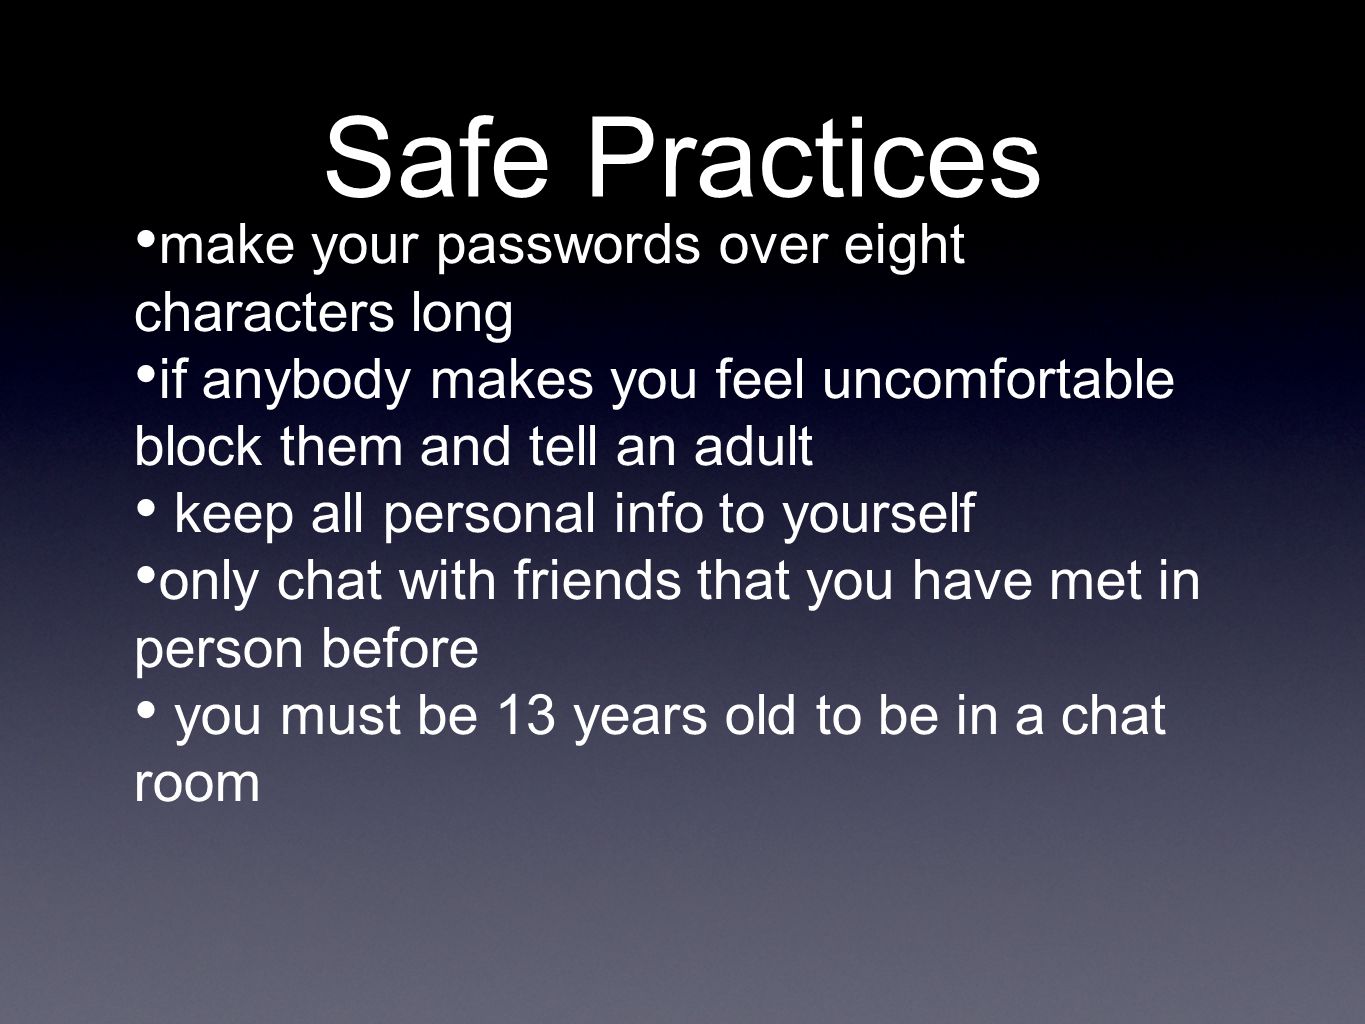 Safe Practices make your passwords over eight characters long if anybody makes you feel uncomfortable block them and tell an adult keep all personal info to yourself only chat with friends that you have met in person before you must be 13 years old to be in a chat room